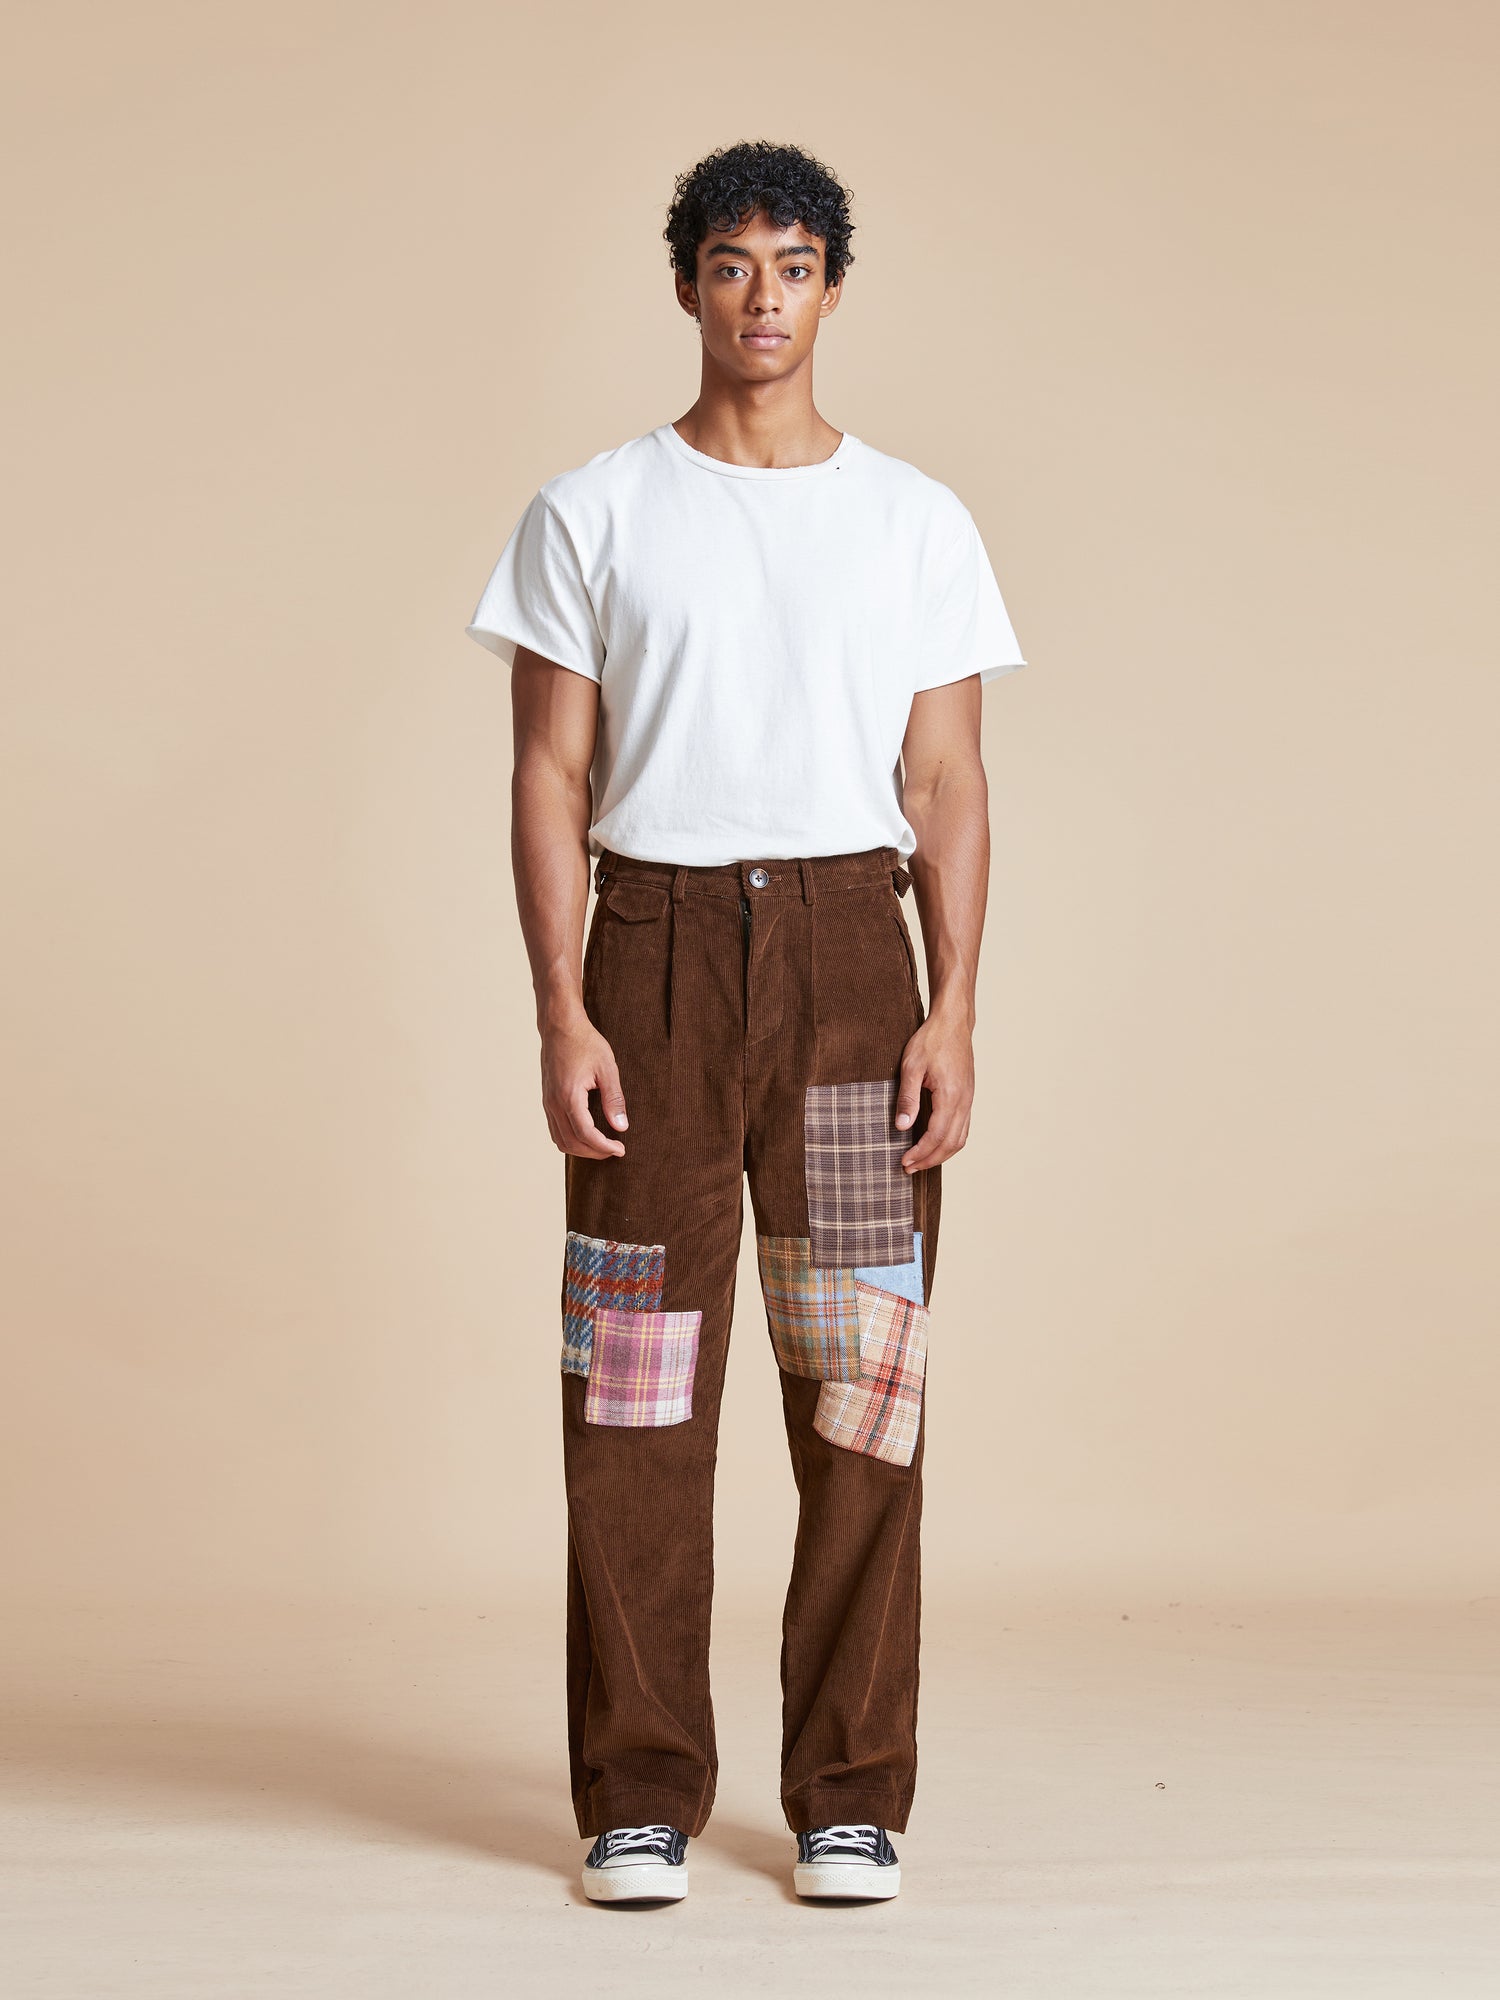 A man wearing Found Multi-Plaid Patch Corduroy Pants with fabric patches.